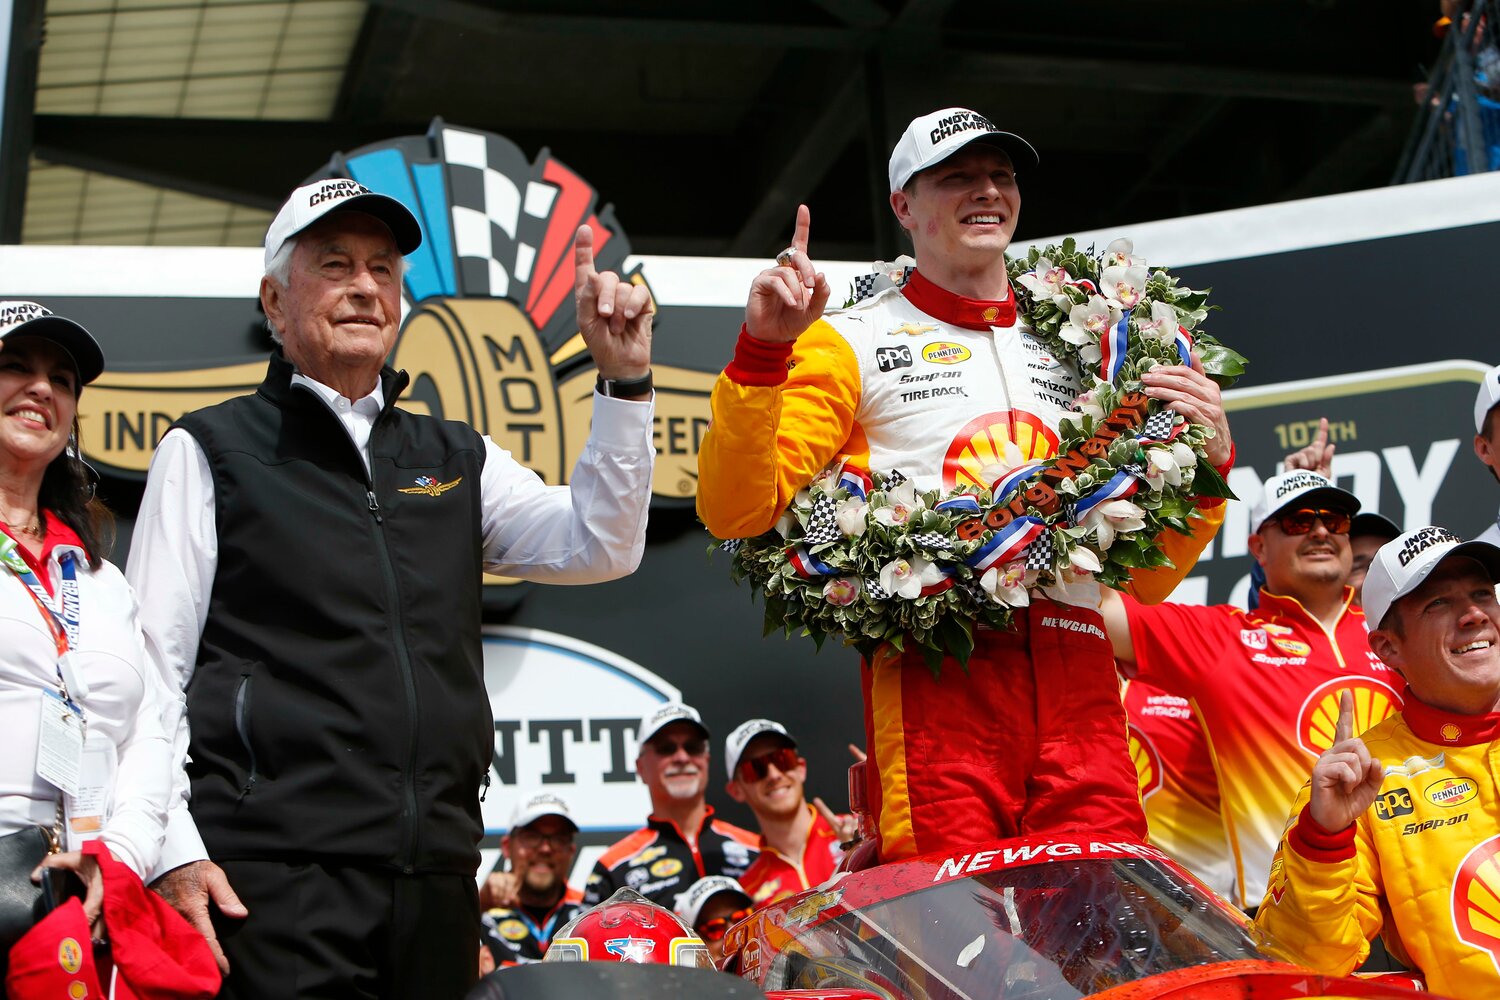 Newgarden along with track owner Roger Penske celebrate the championship. Newgarden became the 19th Team Penske driver to win the "Greatest Spectacle in Racing".